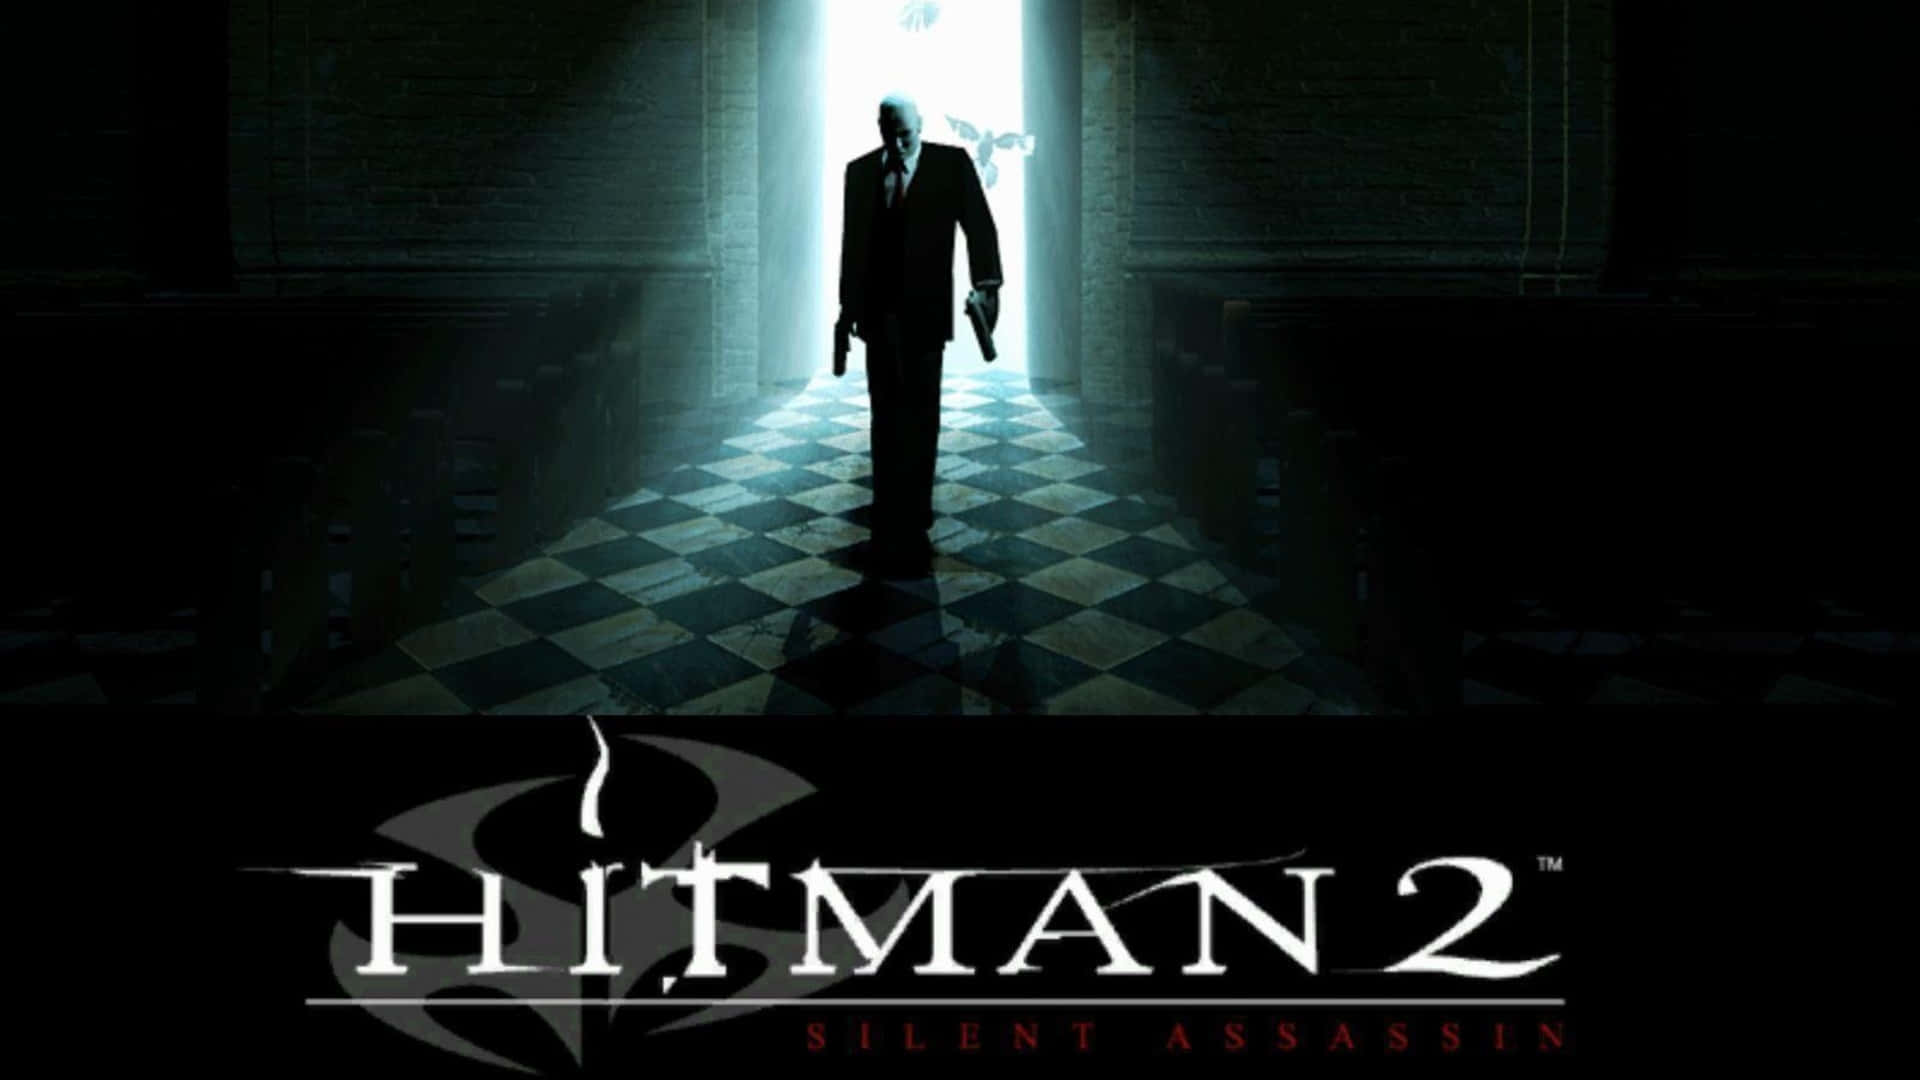 Play the masterpiece of stealth assassination, Hitman 2.